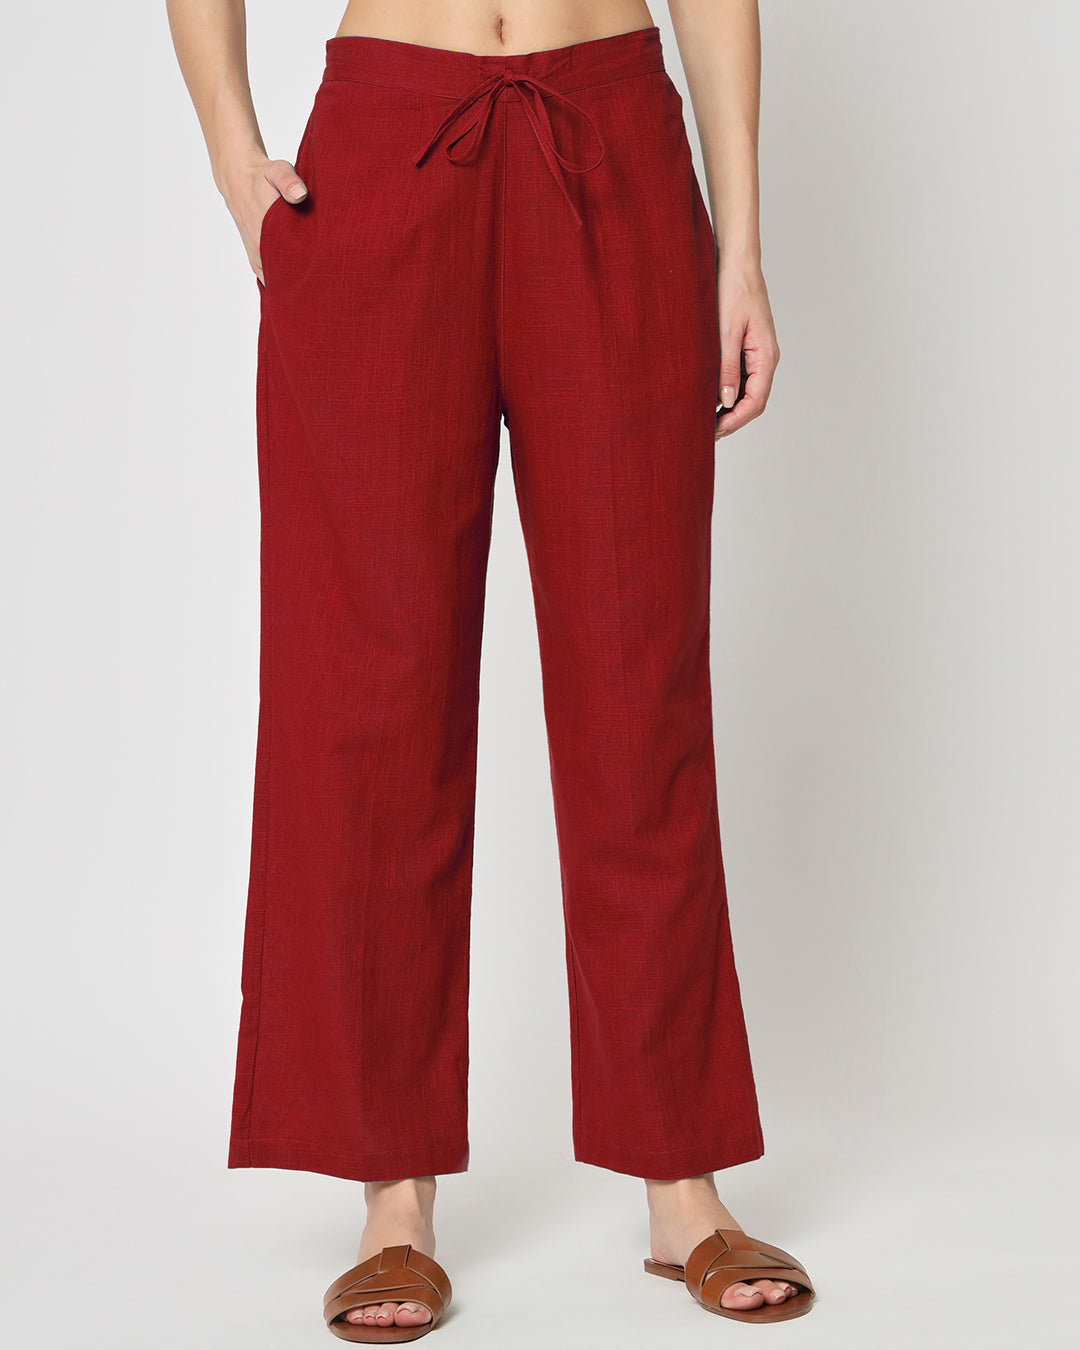 Combo: Deep Teal & Classic Red Straight Pants- Set of 2